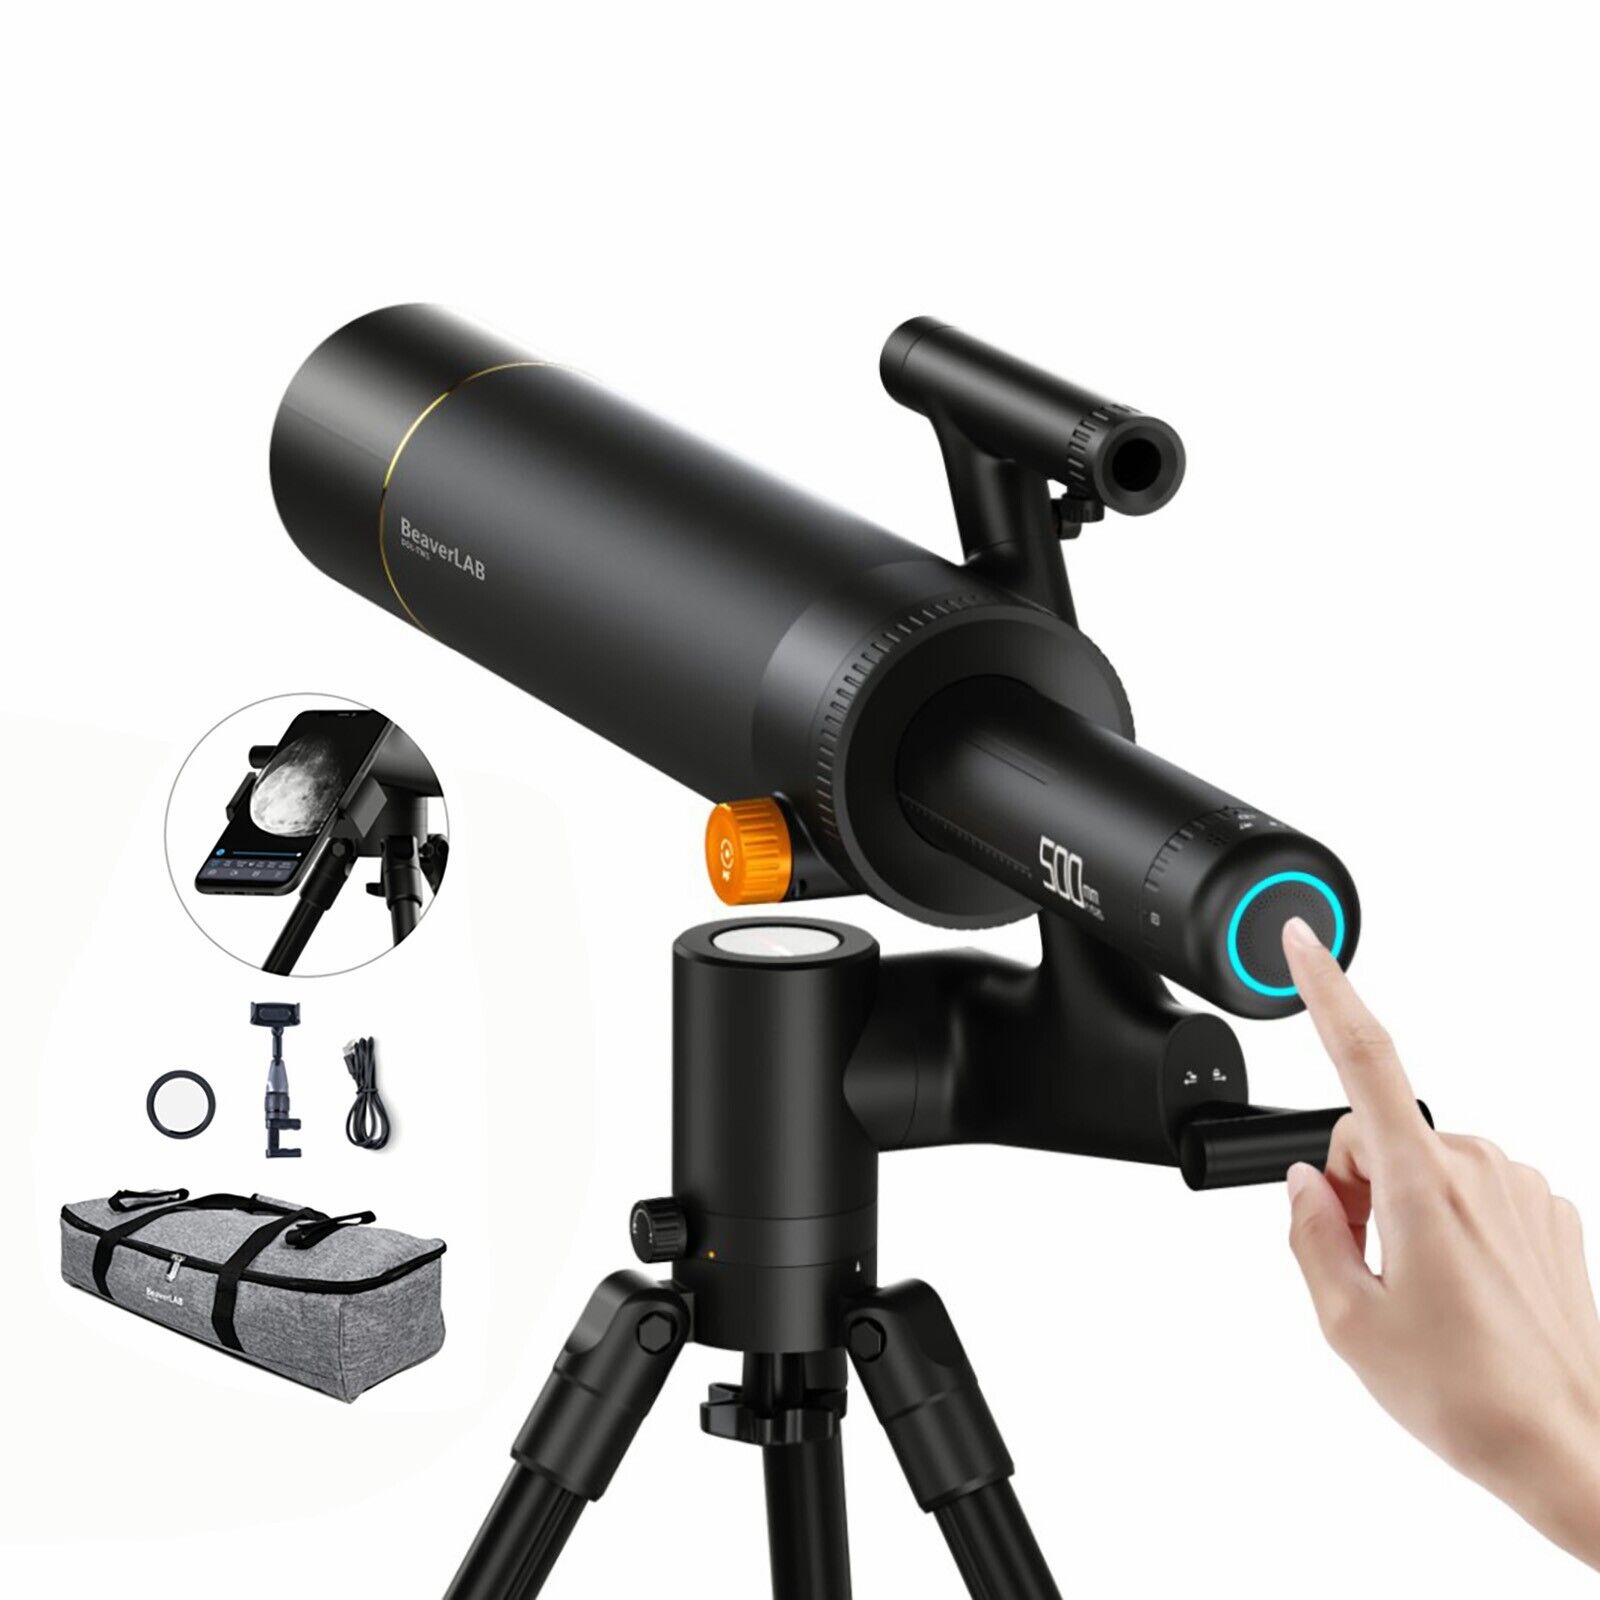 BeaverLAB TW1 Smart Digital Telescope Refracting Astronomy for Teens and Adults